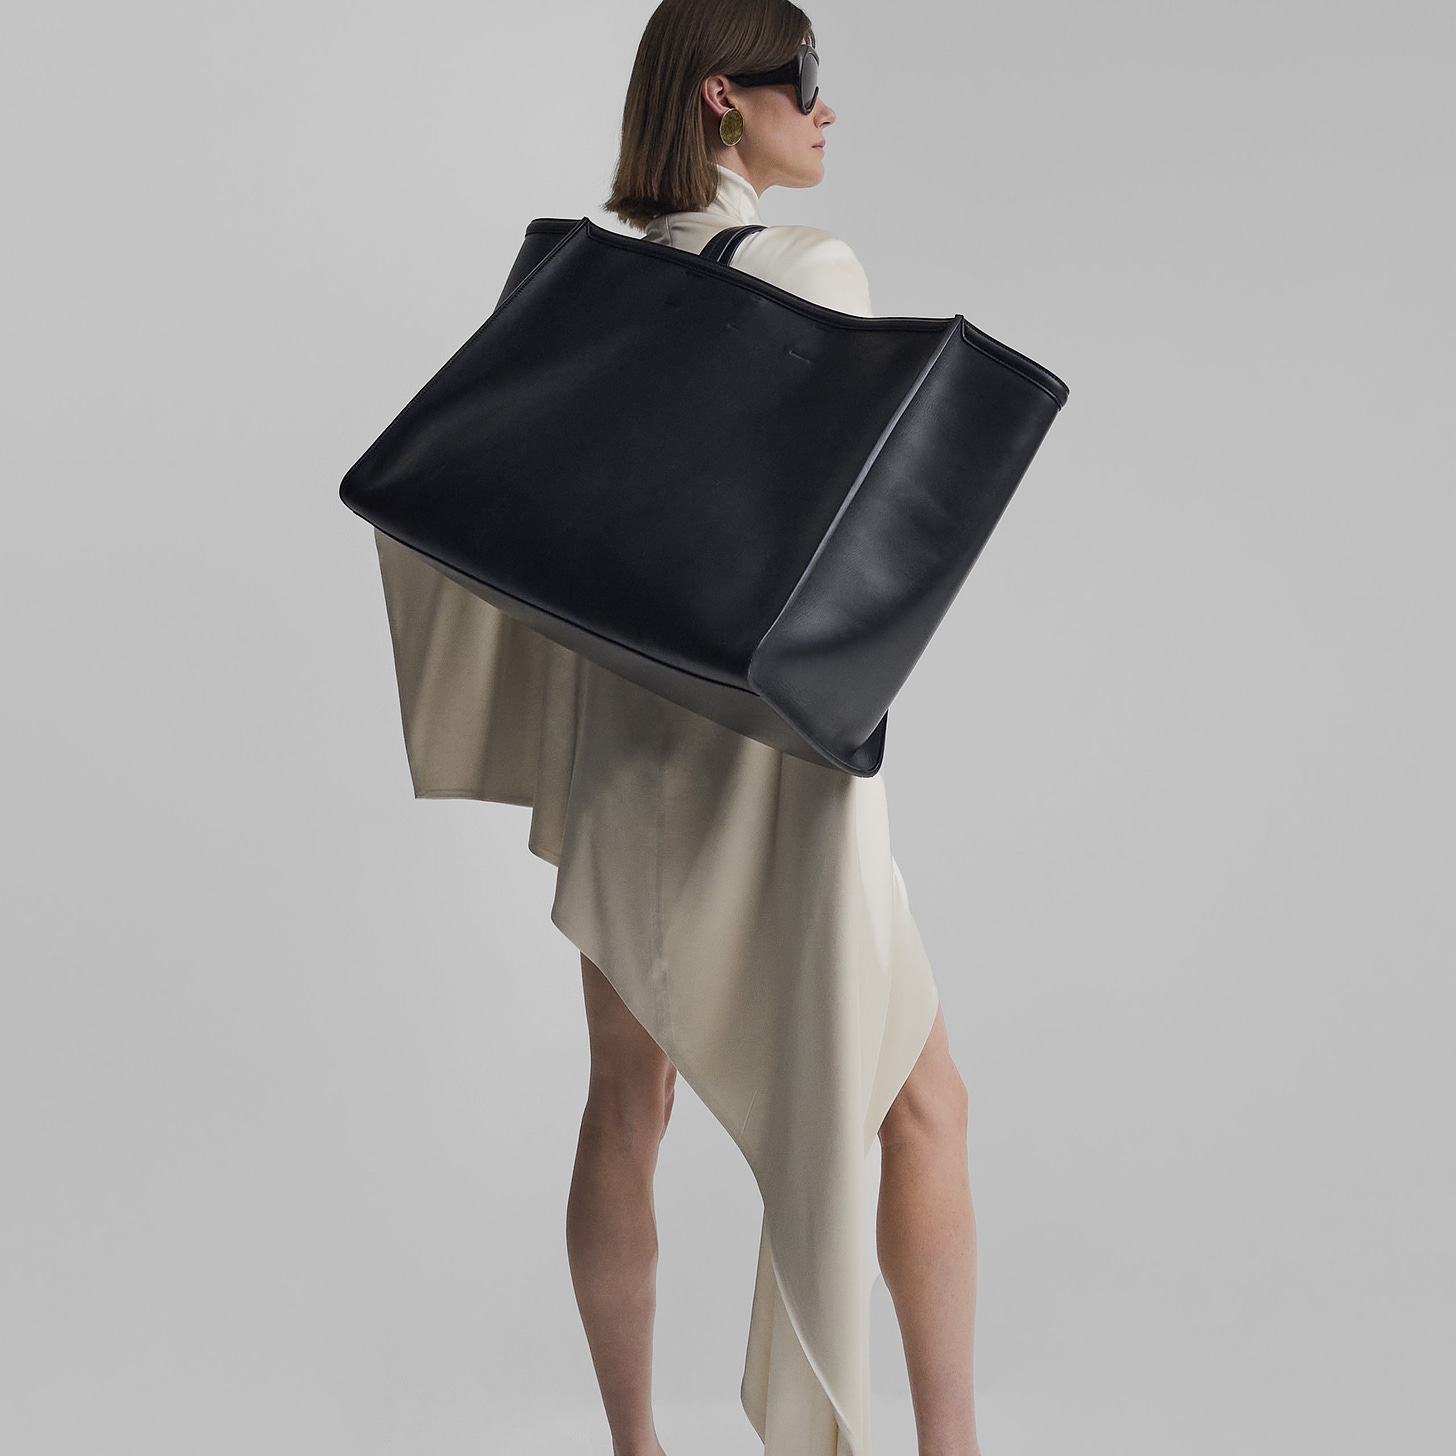 Model holding black leather XL cabas bag. She is wearing a white dress and sunglasses.